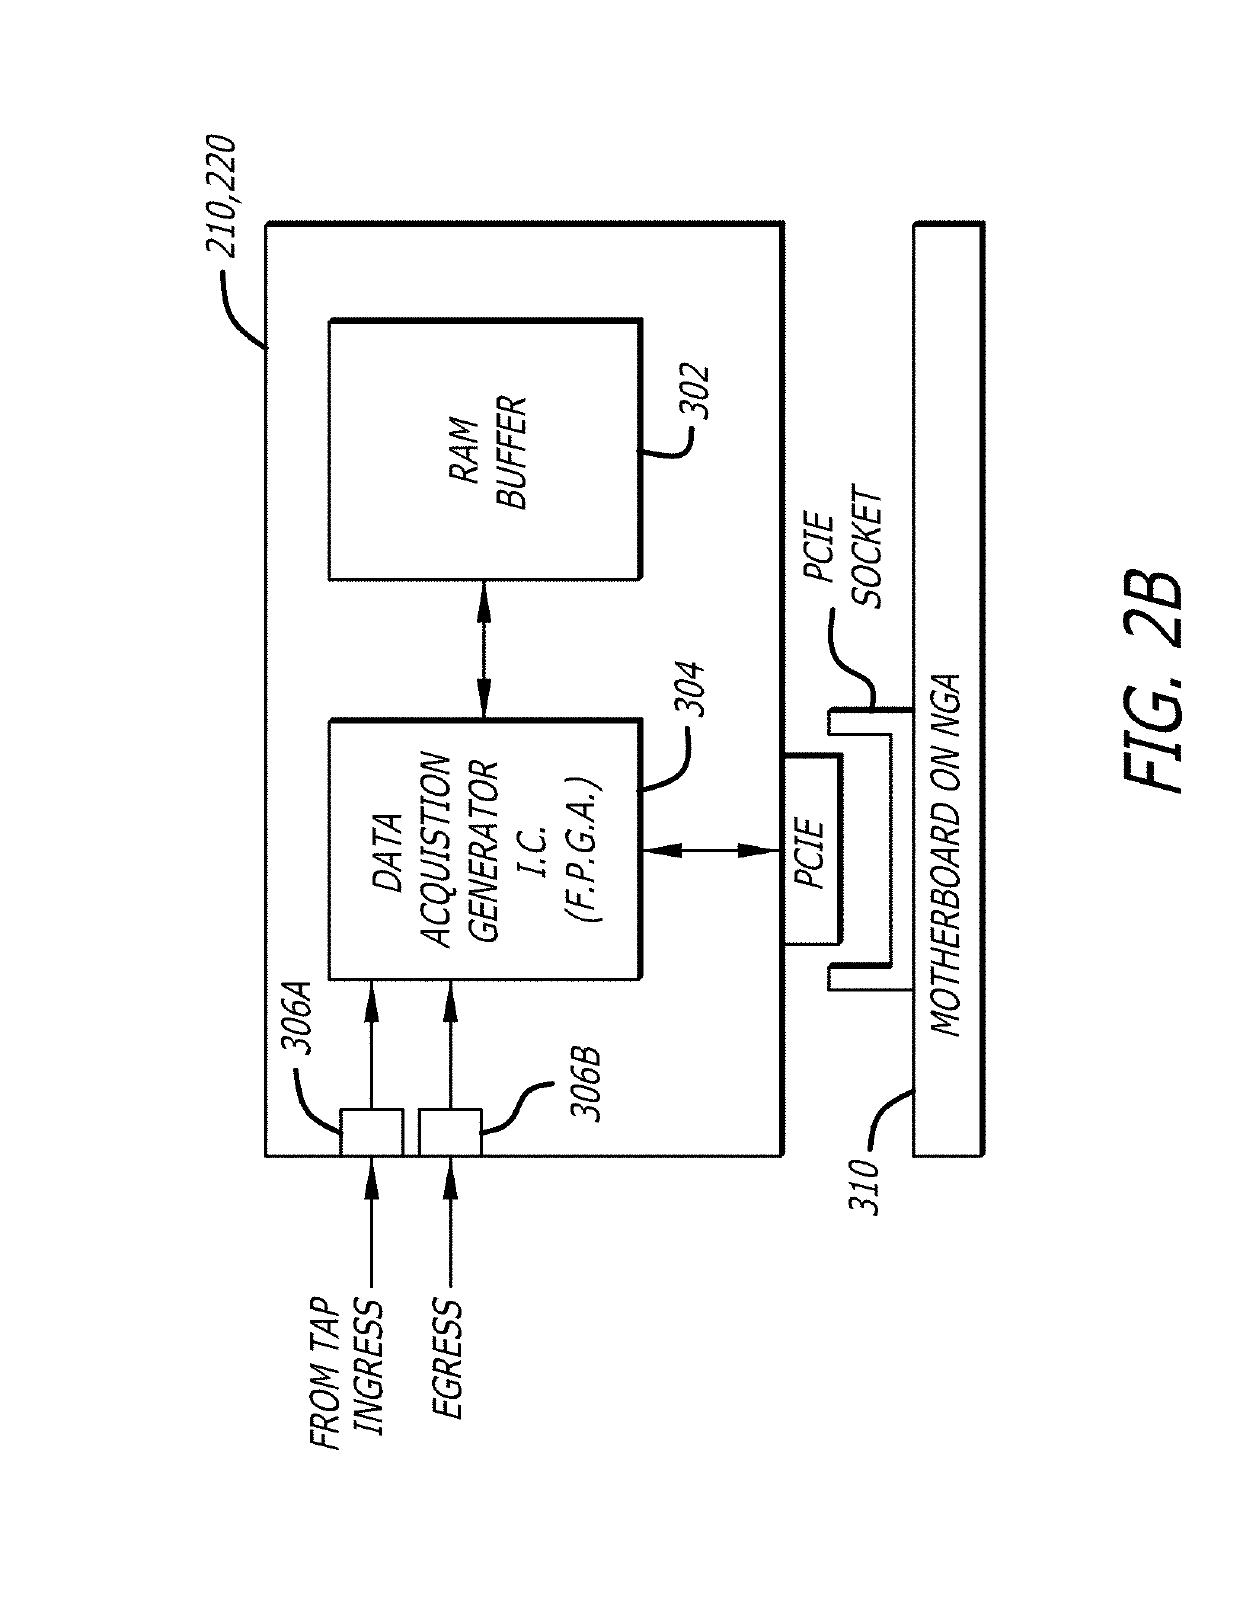 Network recorders with entropy and value based packet truncation